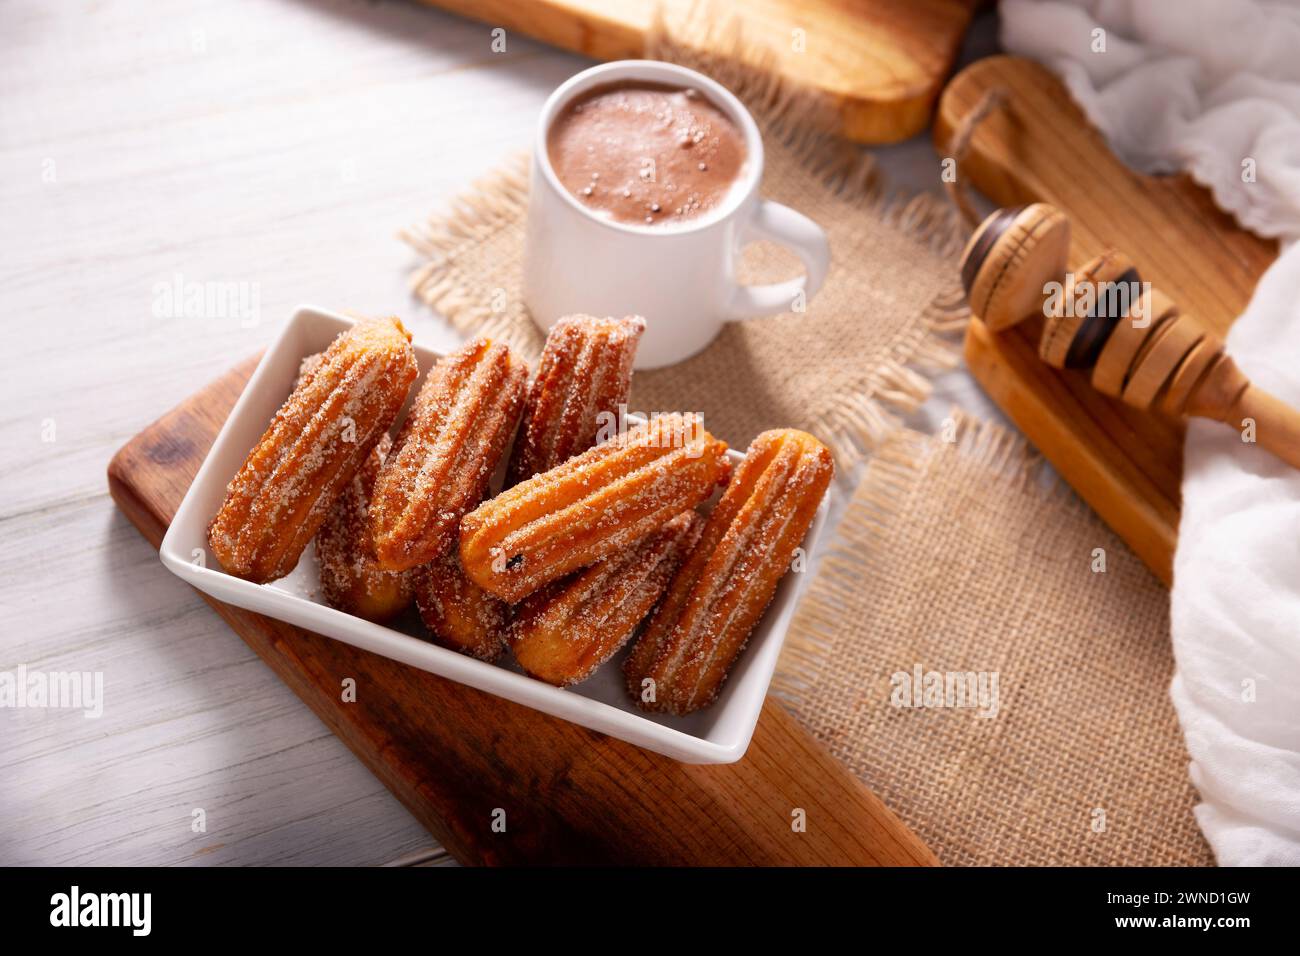 Churros. Fried wheat flour dough, a very popular sweet snack in Spain, Mexico and other countries where it is customary to eat them for breakfast or s Stock Photo